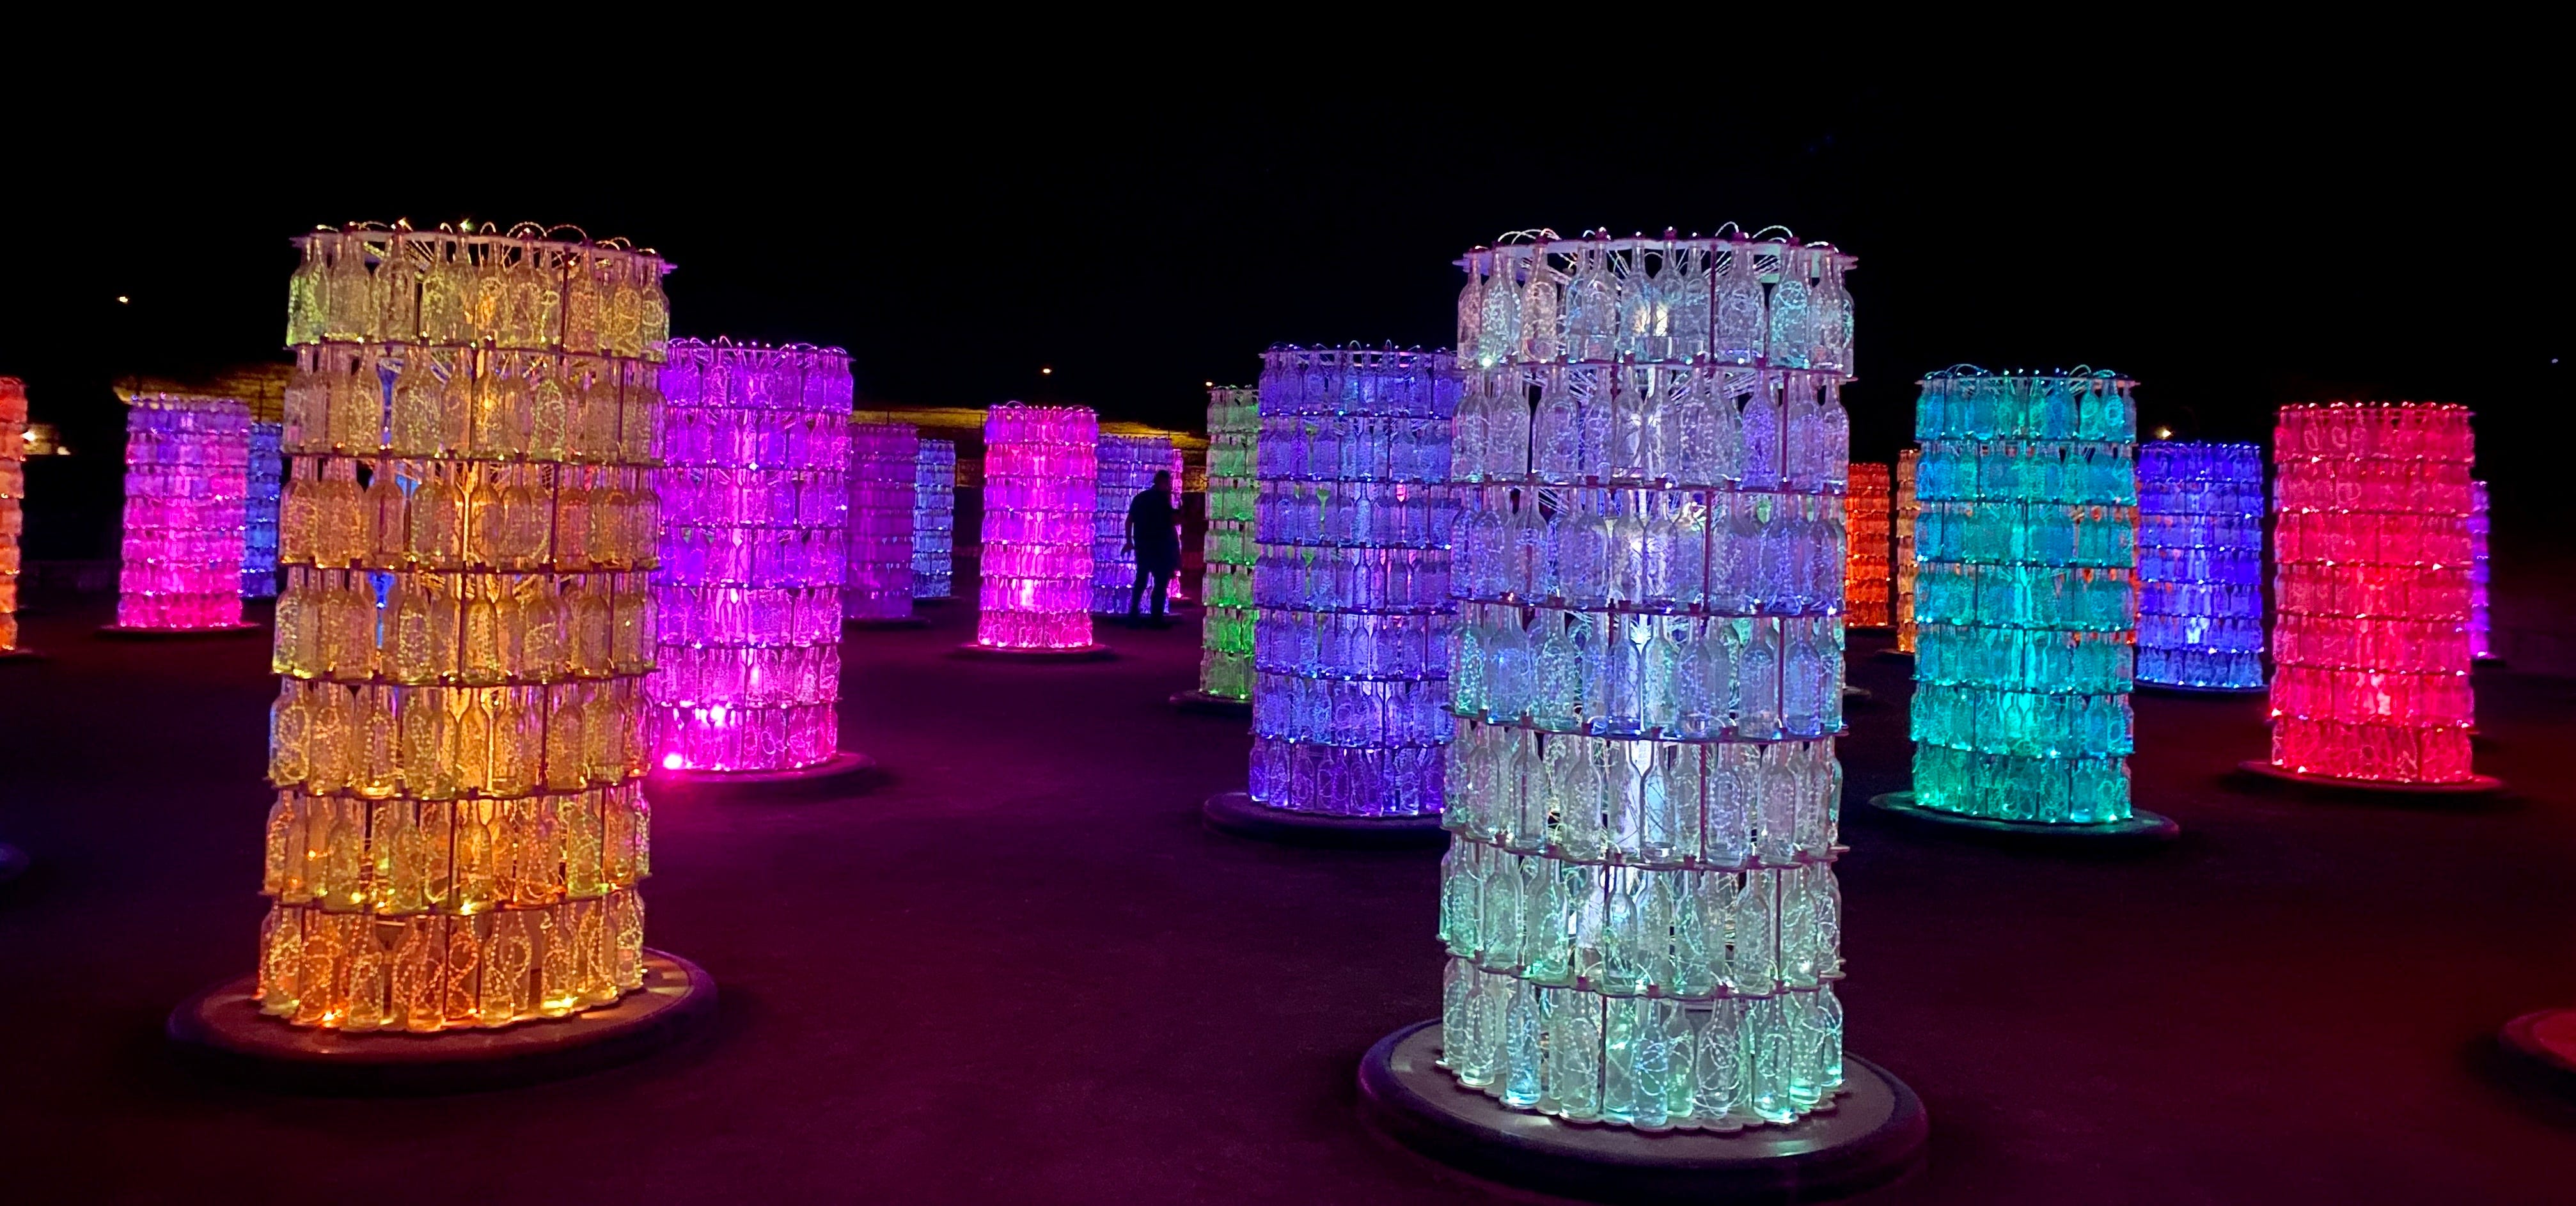 Lighted towers made of clear wine bottles in homage of the area’s wine industry.